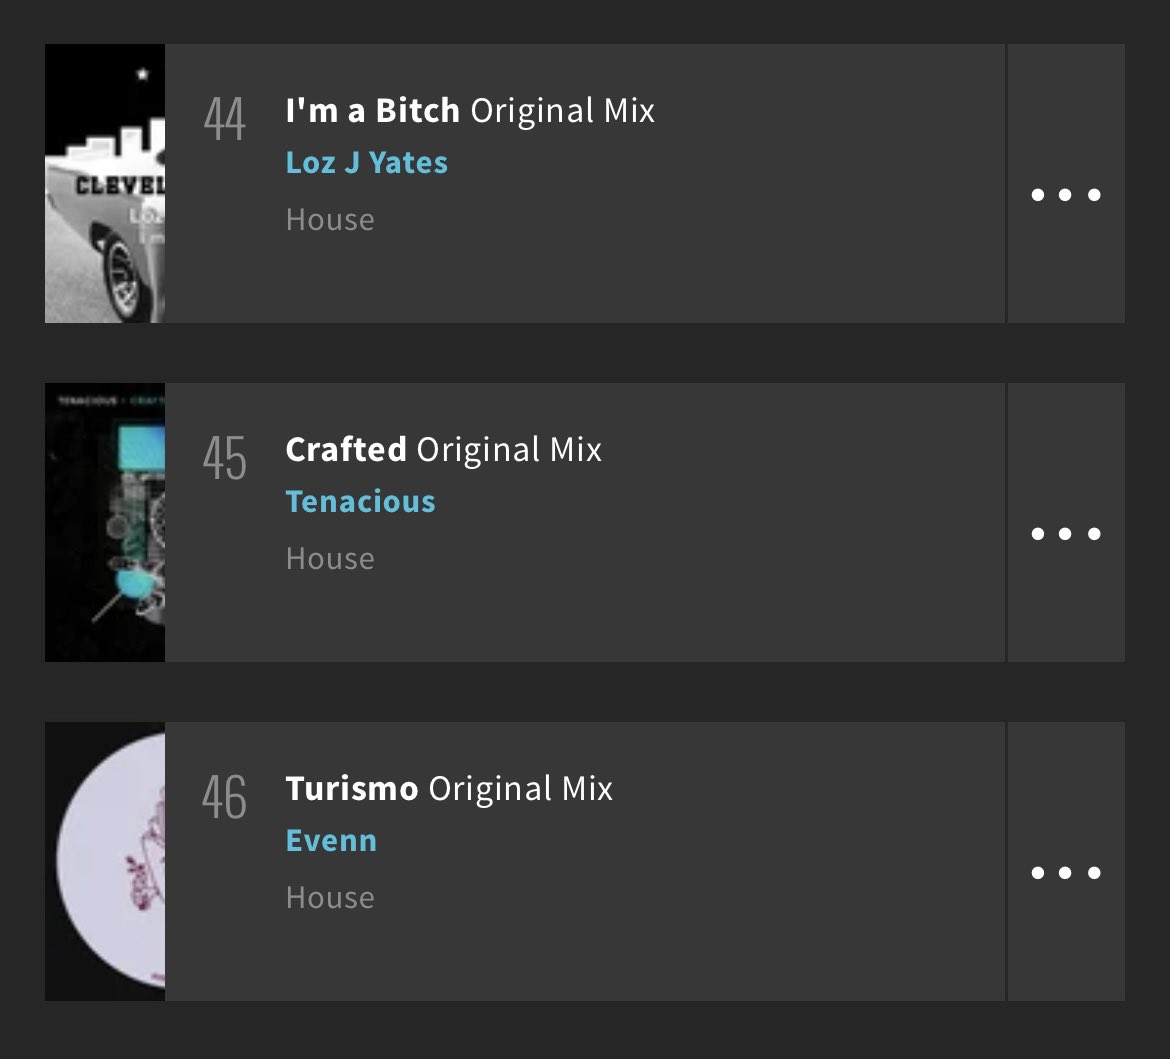 Big shoutout to everyone supporting @tenaciousuk - Crafted. We are climbing up towards the top 40 on @beatport hype! 🔥 beatport.com/release/crafte… #beatport #beatporthype #beatporttop100